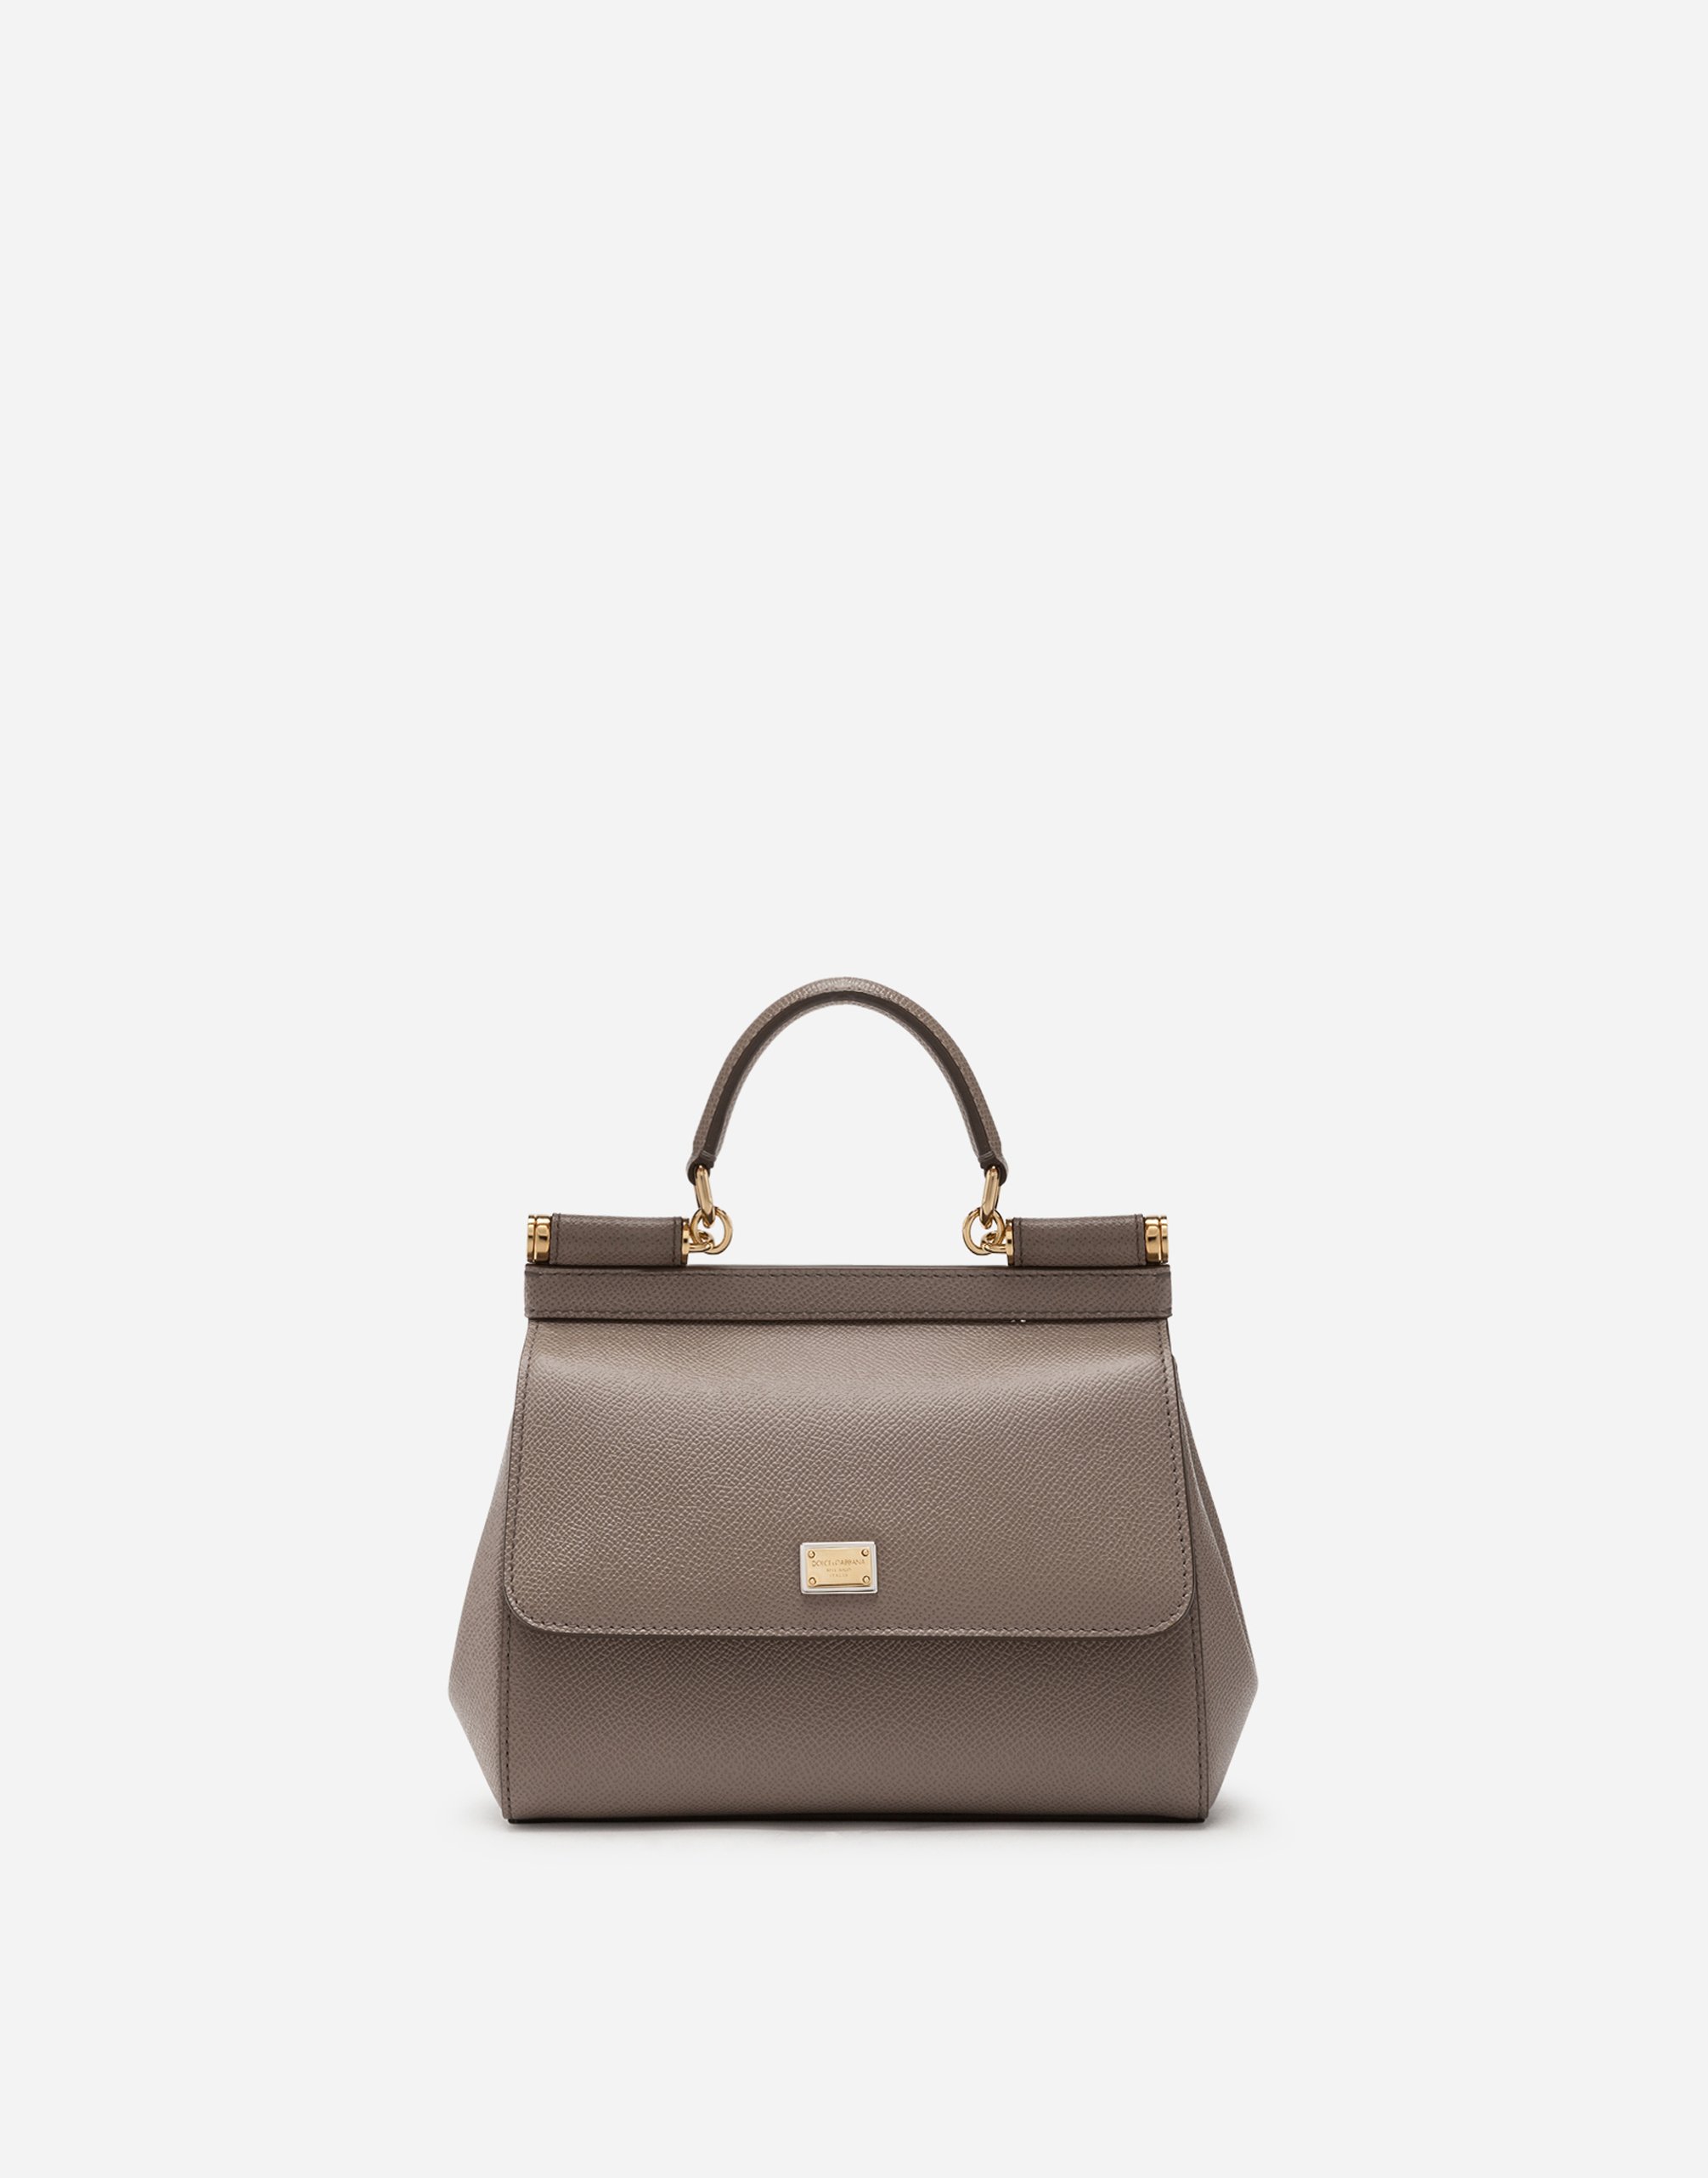 SMALL DAUPHINE LEATHER SICILY BAG in Beige